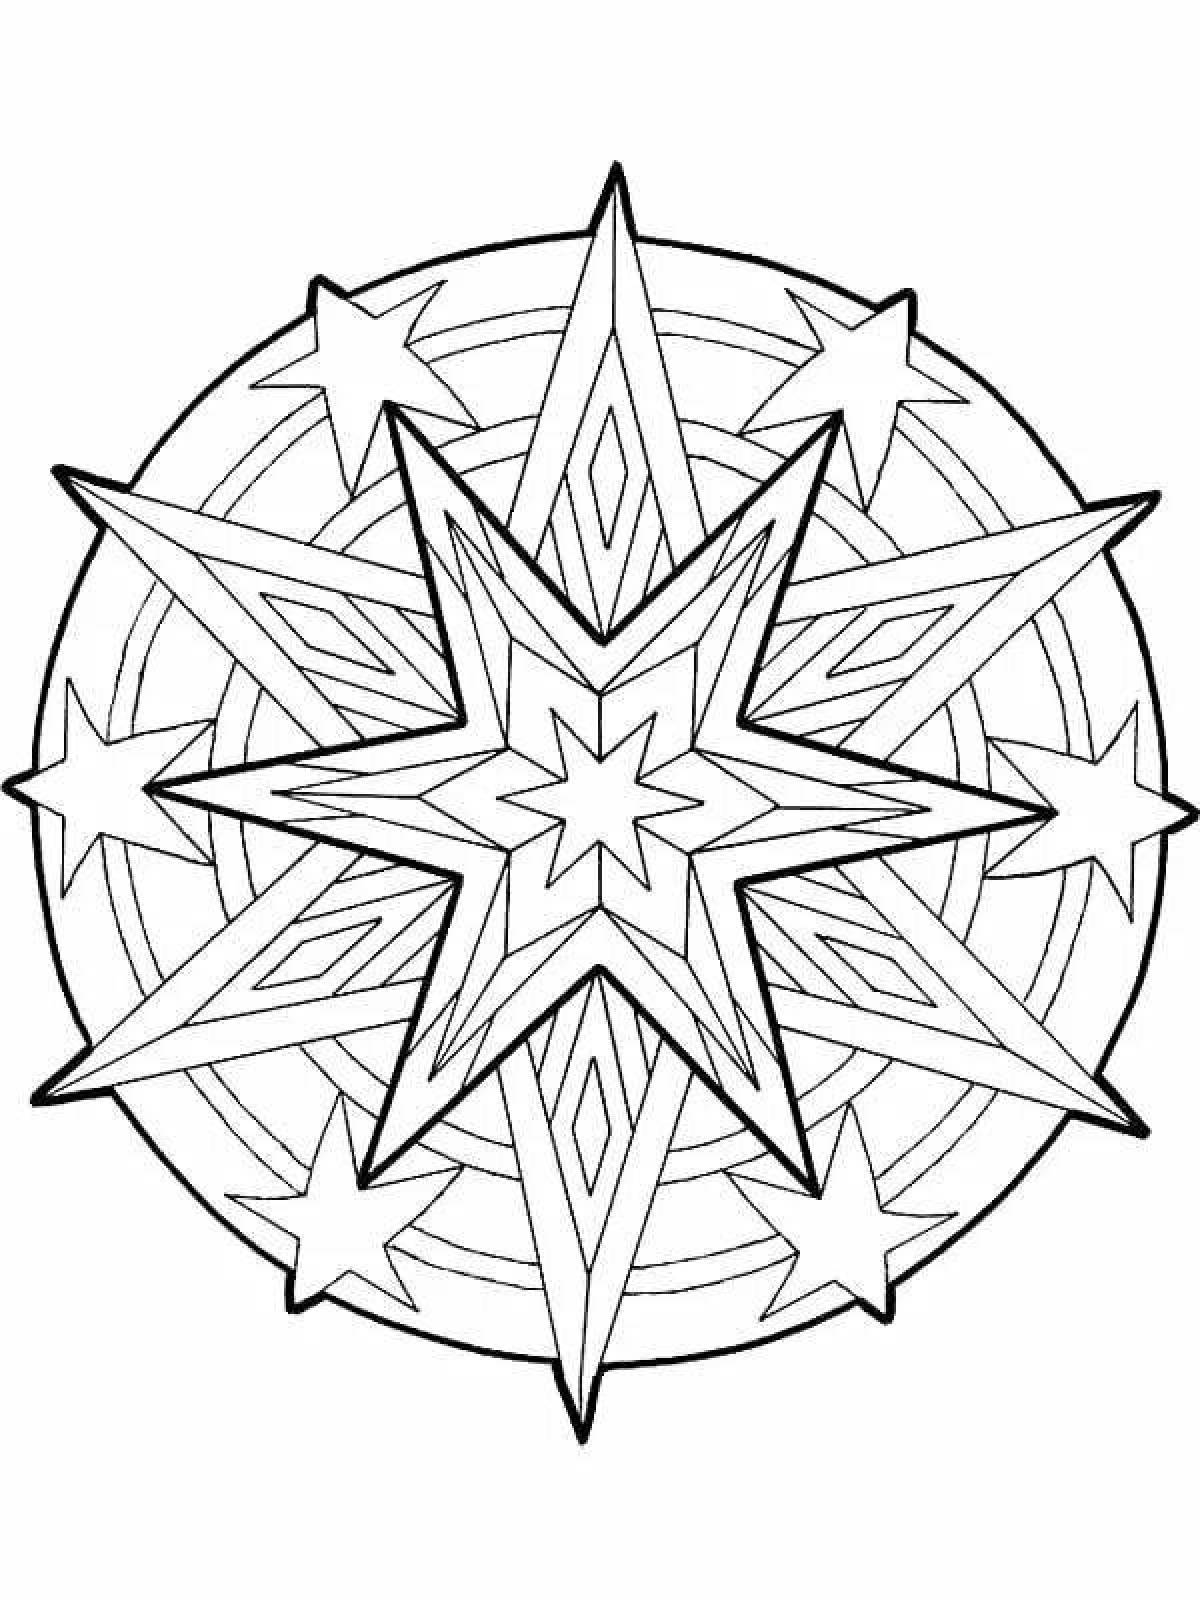 Coloring page twinkling christmas star